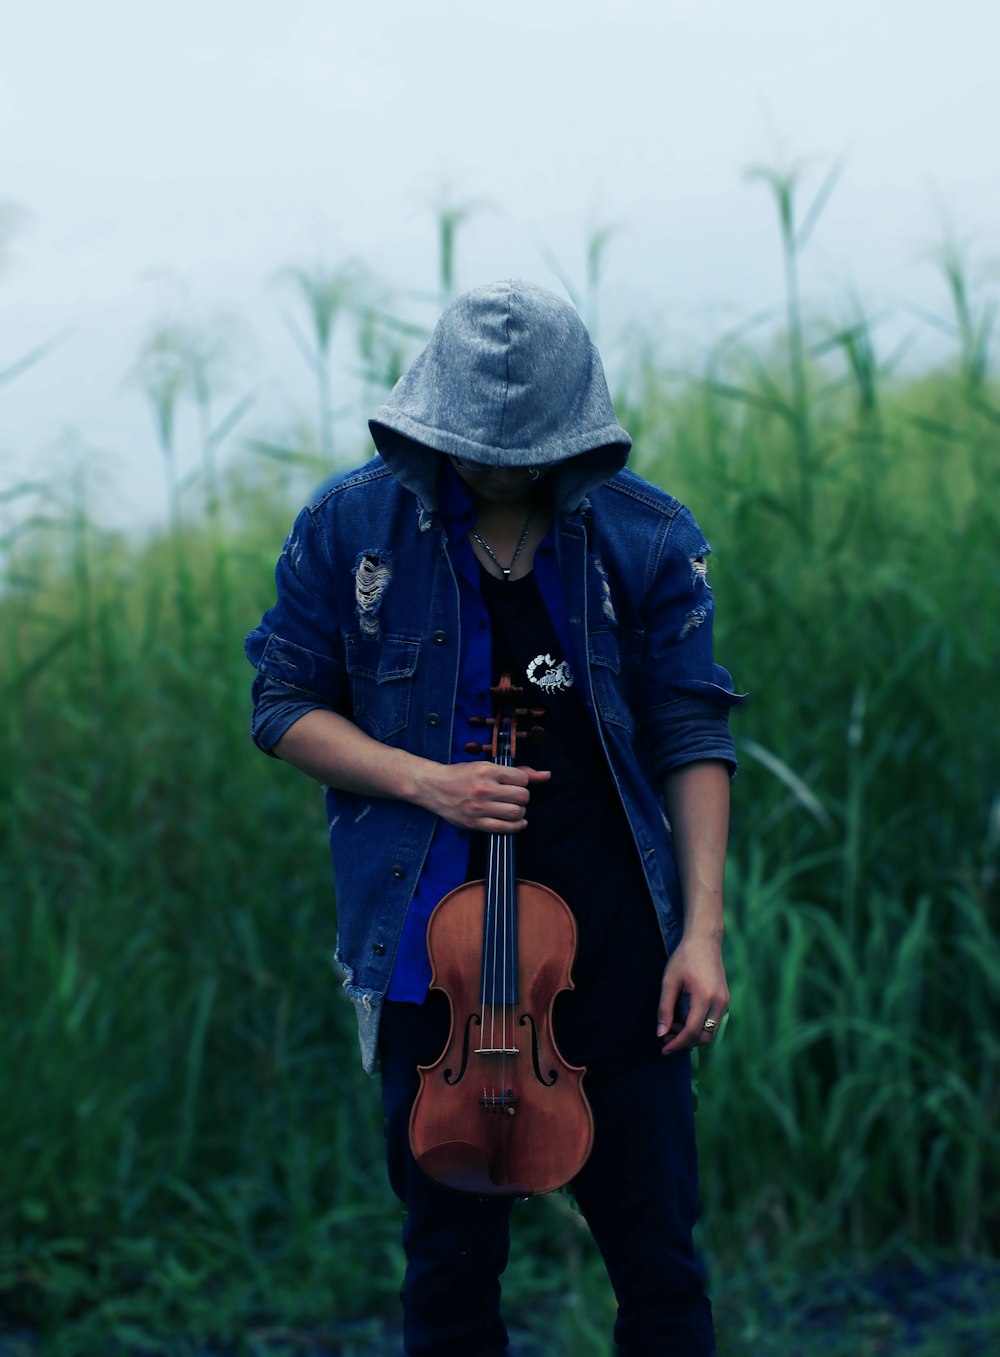 man in blue jacket and gray knit cap playing violin